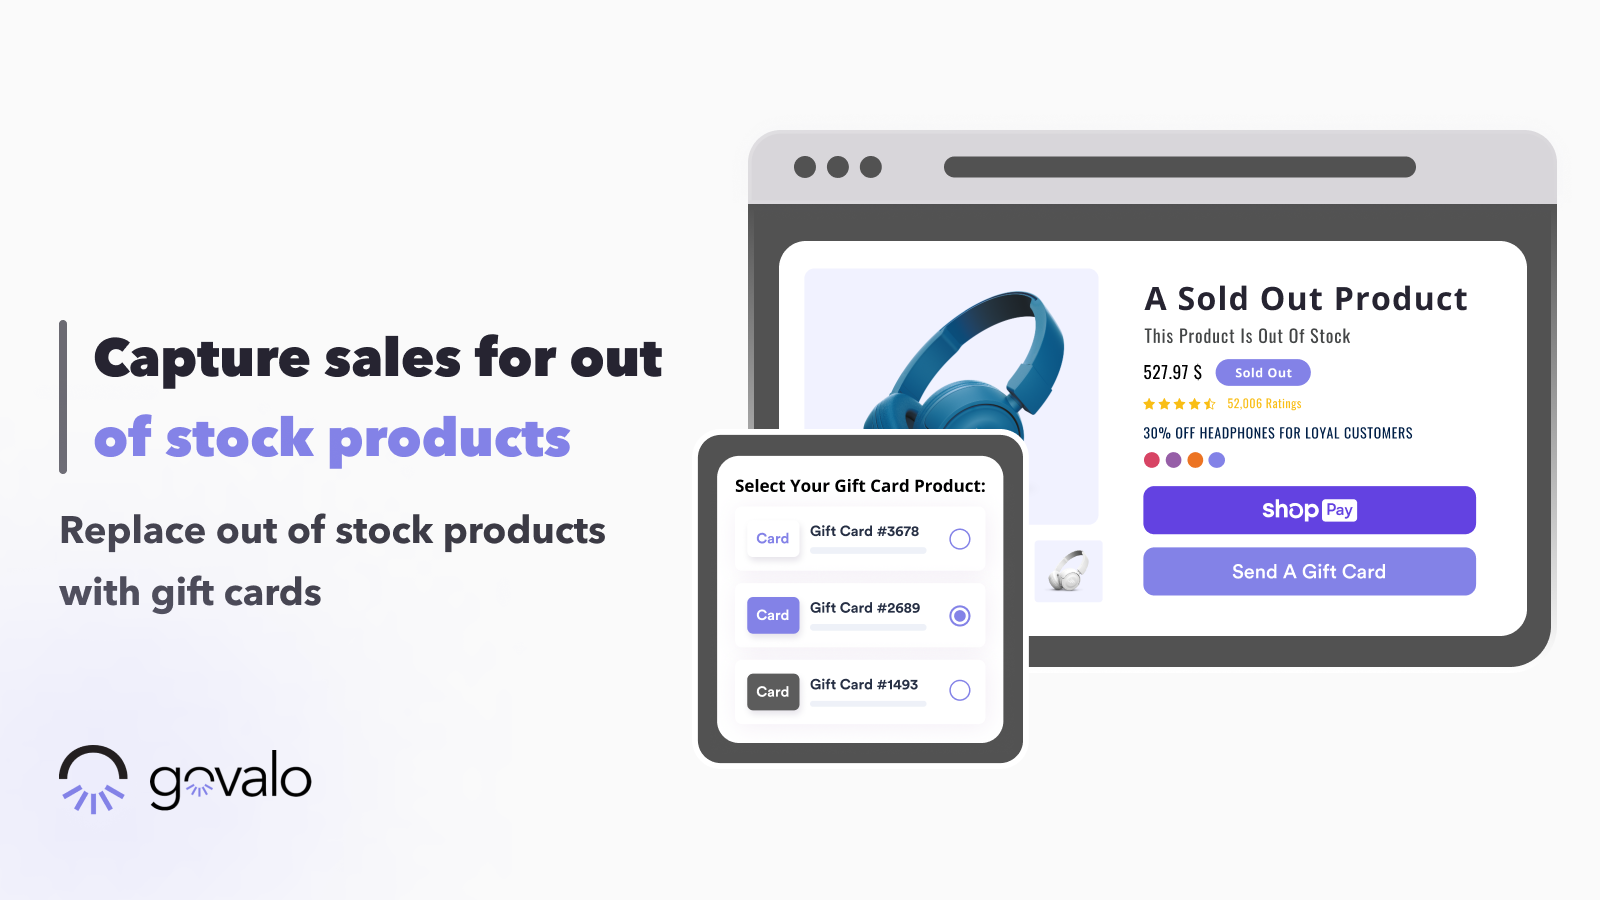 Capture sales for out of stock products into gift cards